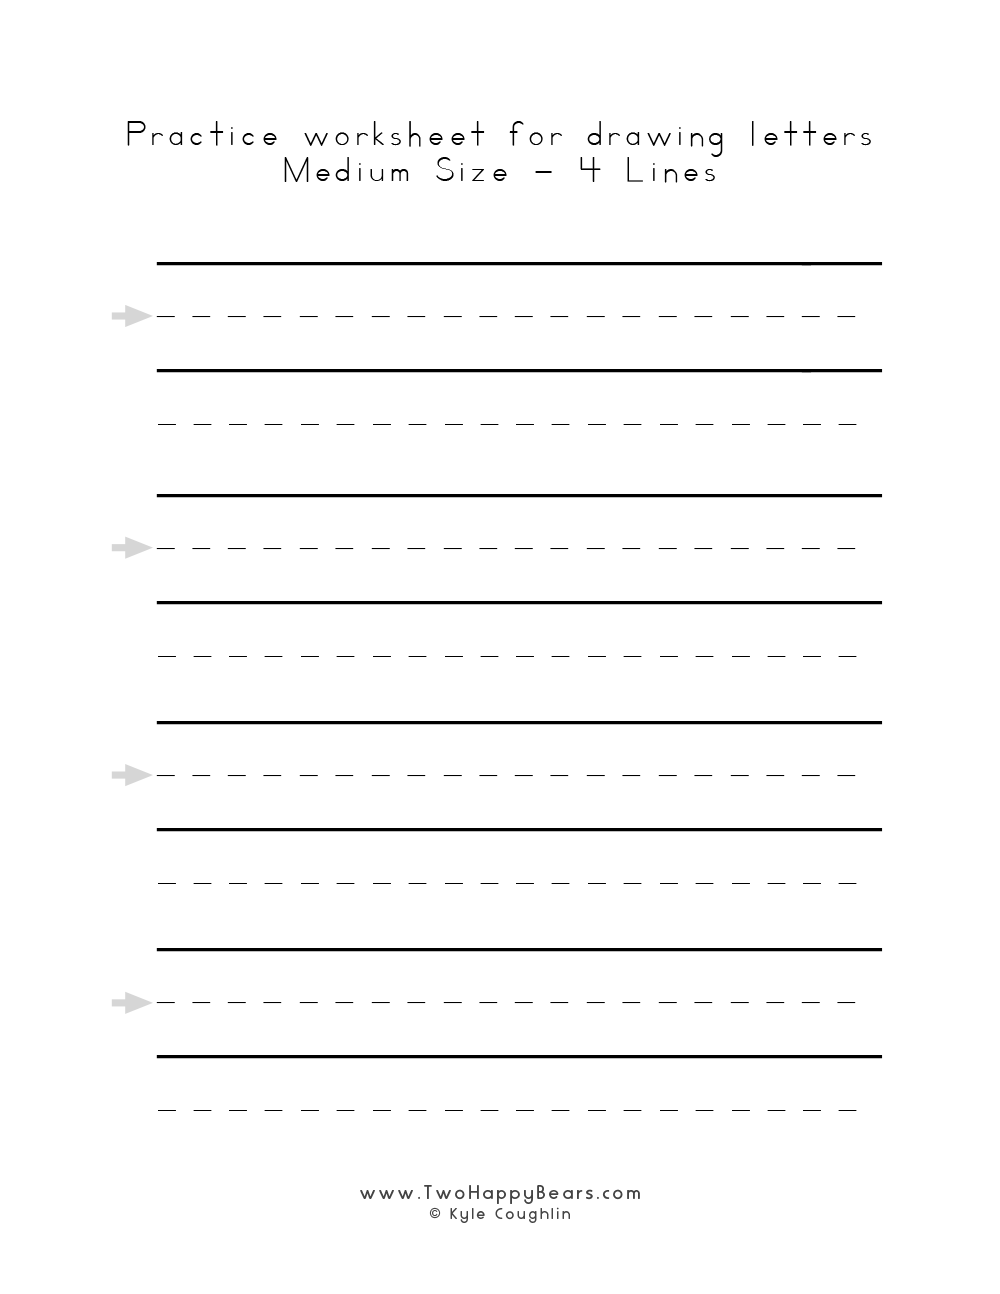 Medium line blank worksheets for drawing letters